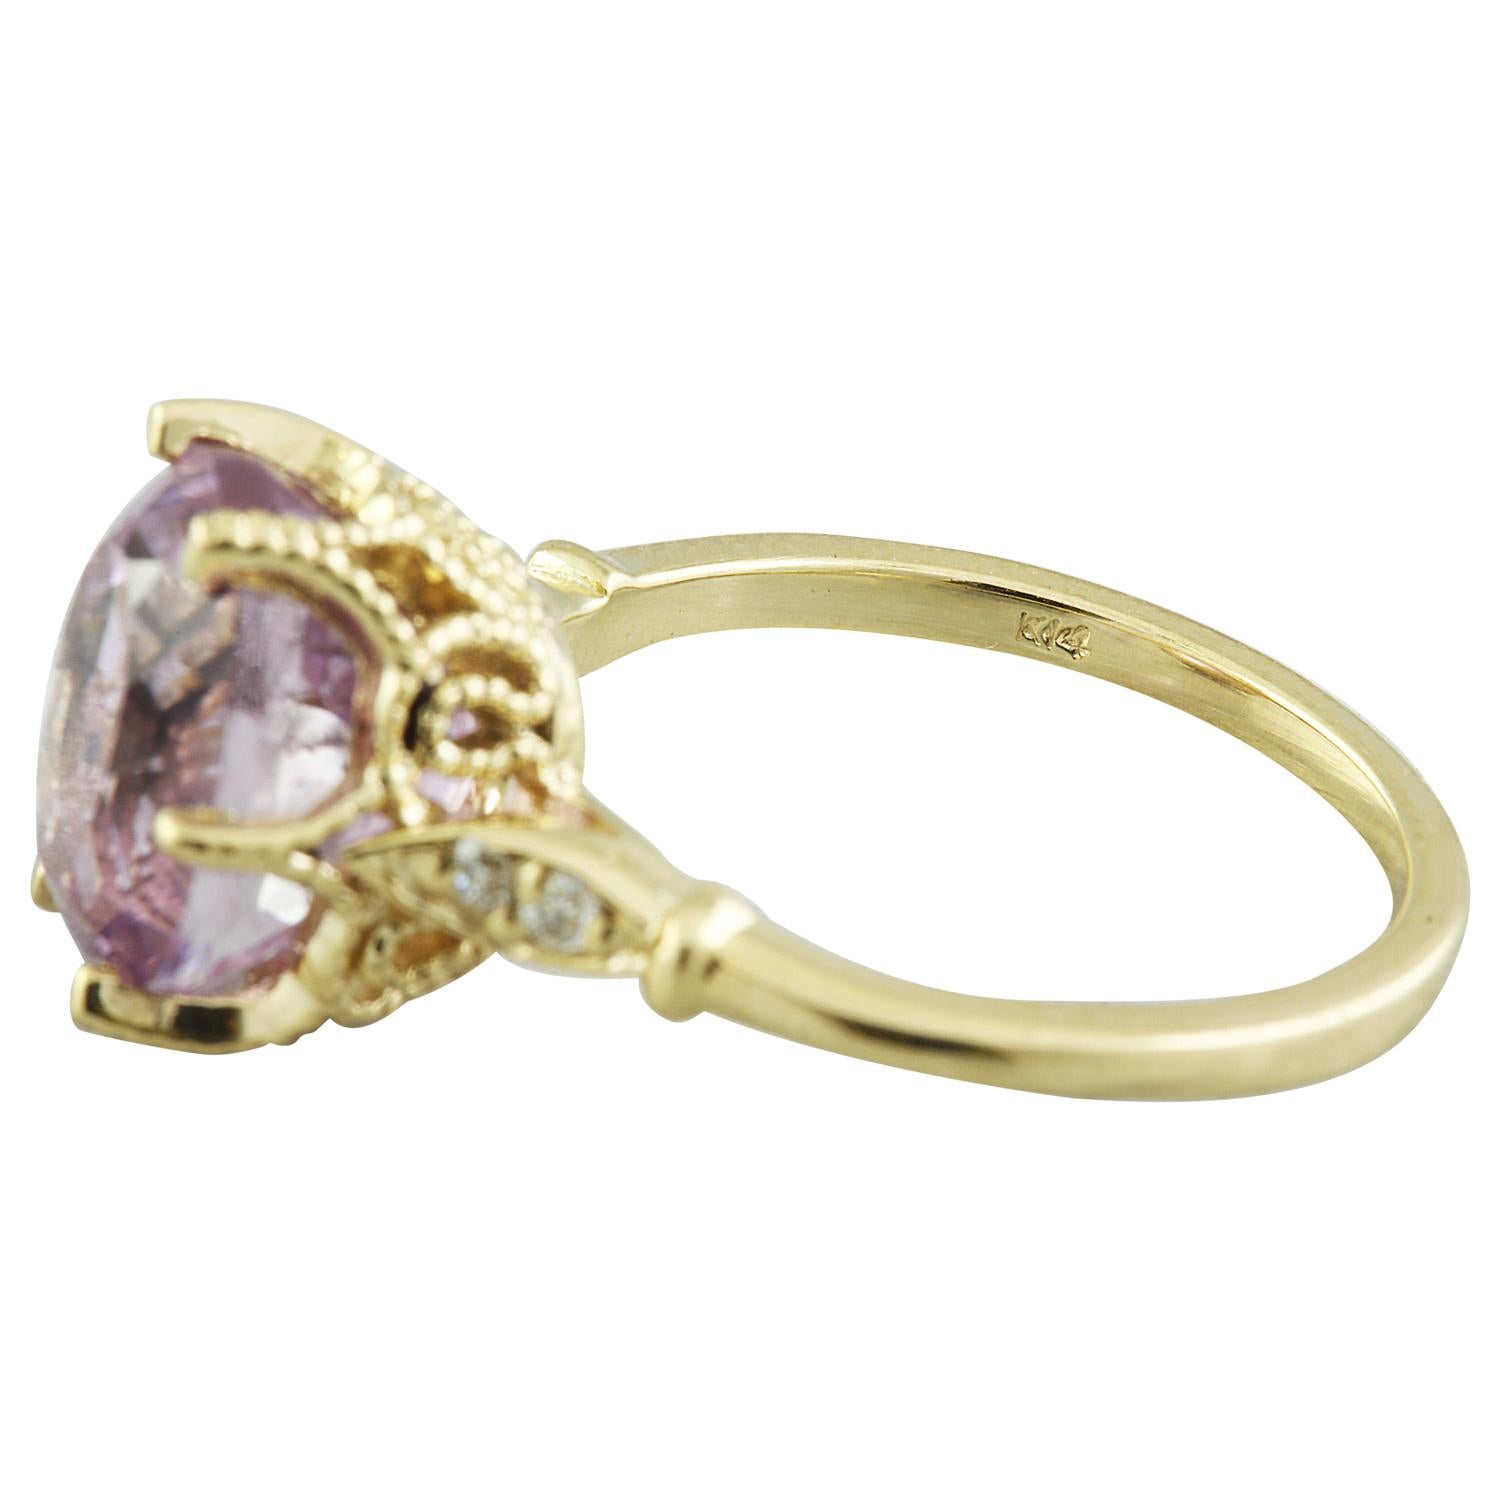 Natural Kunzite Diamond Ring In 14 Karat Yellow Gold In New Condition For Sale In Los Angeles, CA